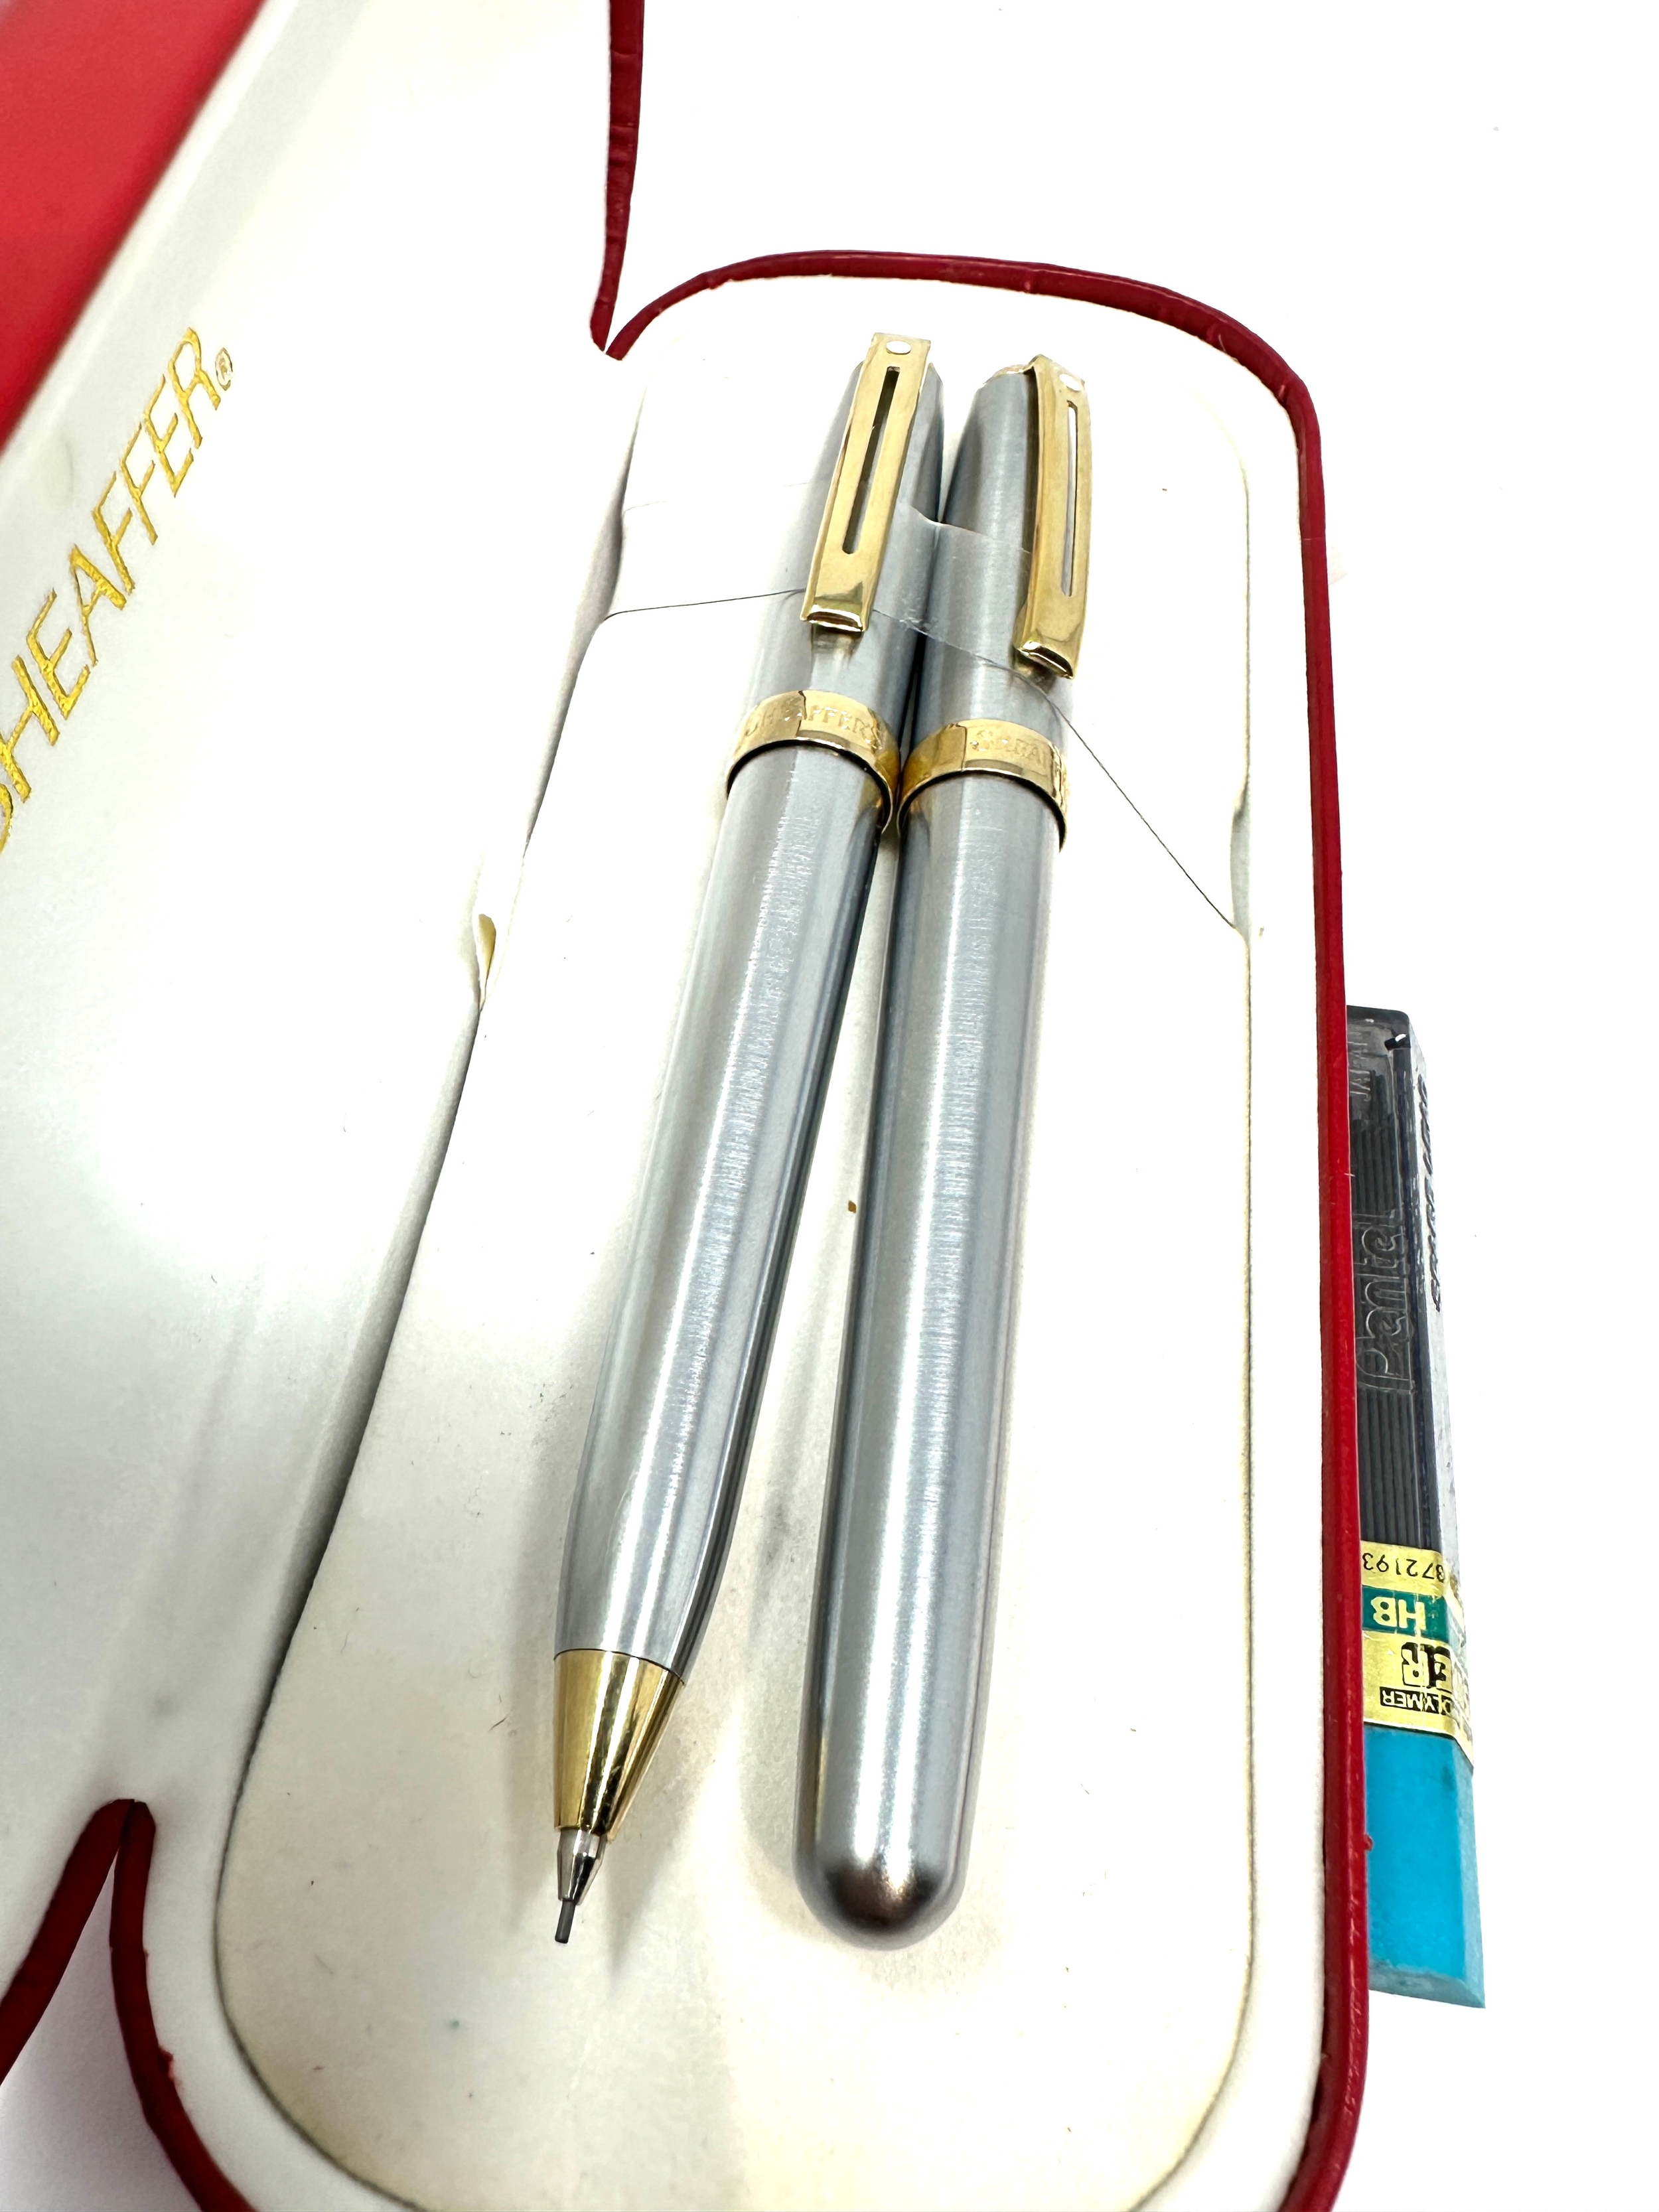 As new boxed sheaffer ballpoint pen & pencil - Image 2 of 4